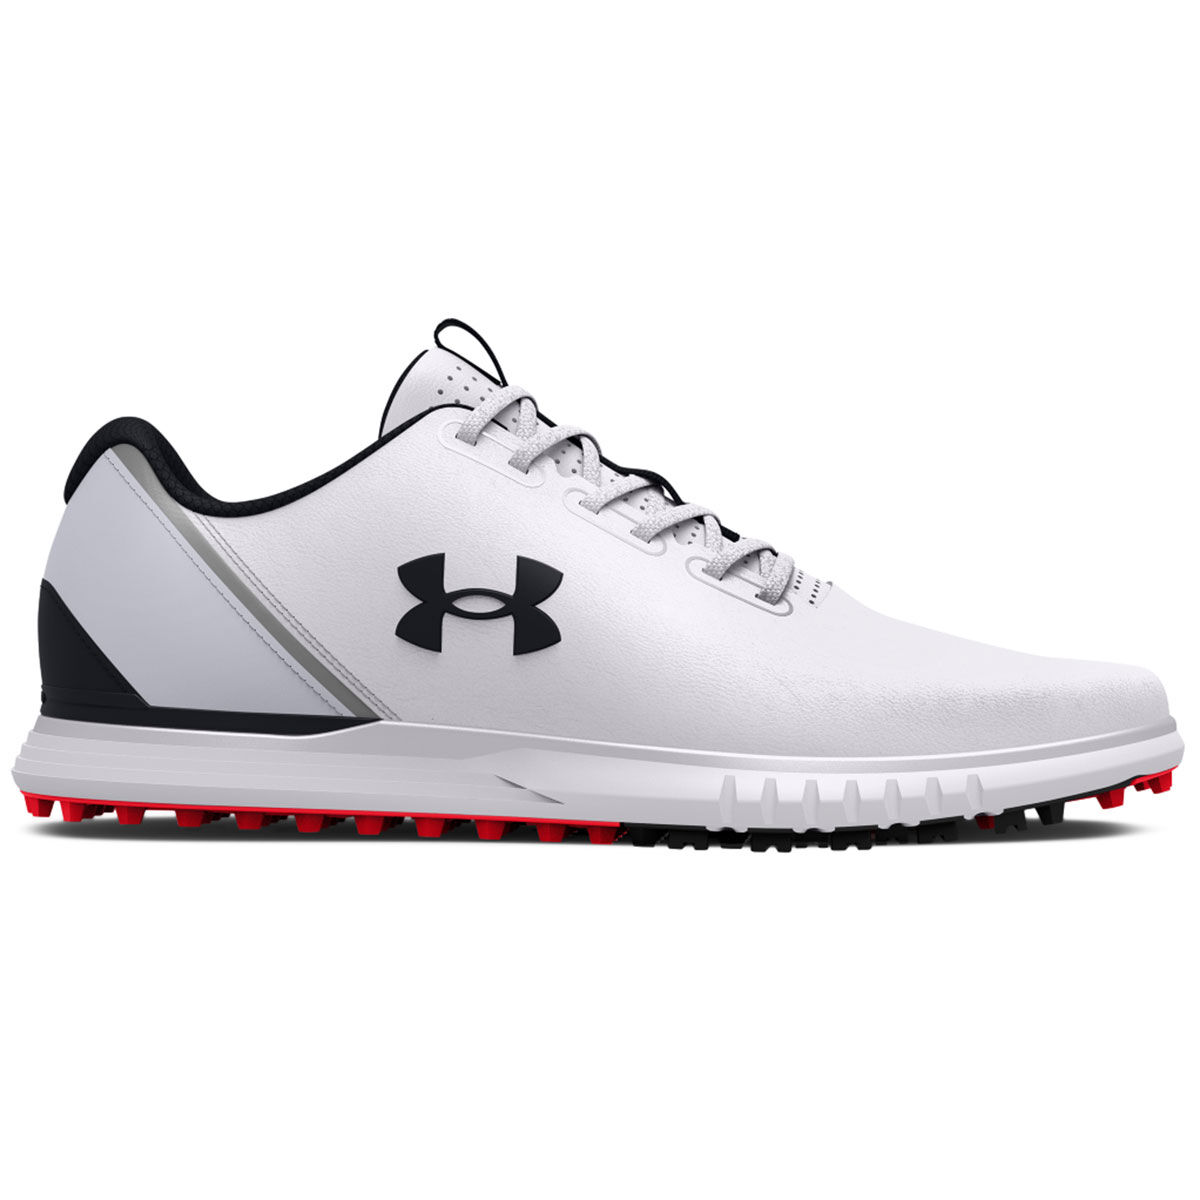 Under Armour Men’s Medal Waterproof Spikeless Golf Shoes, Mens, White/grey/black, 9 | American Golf